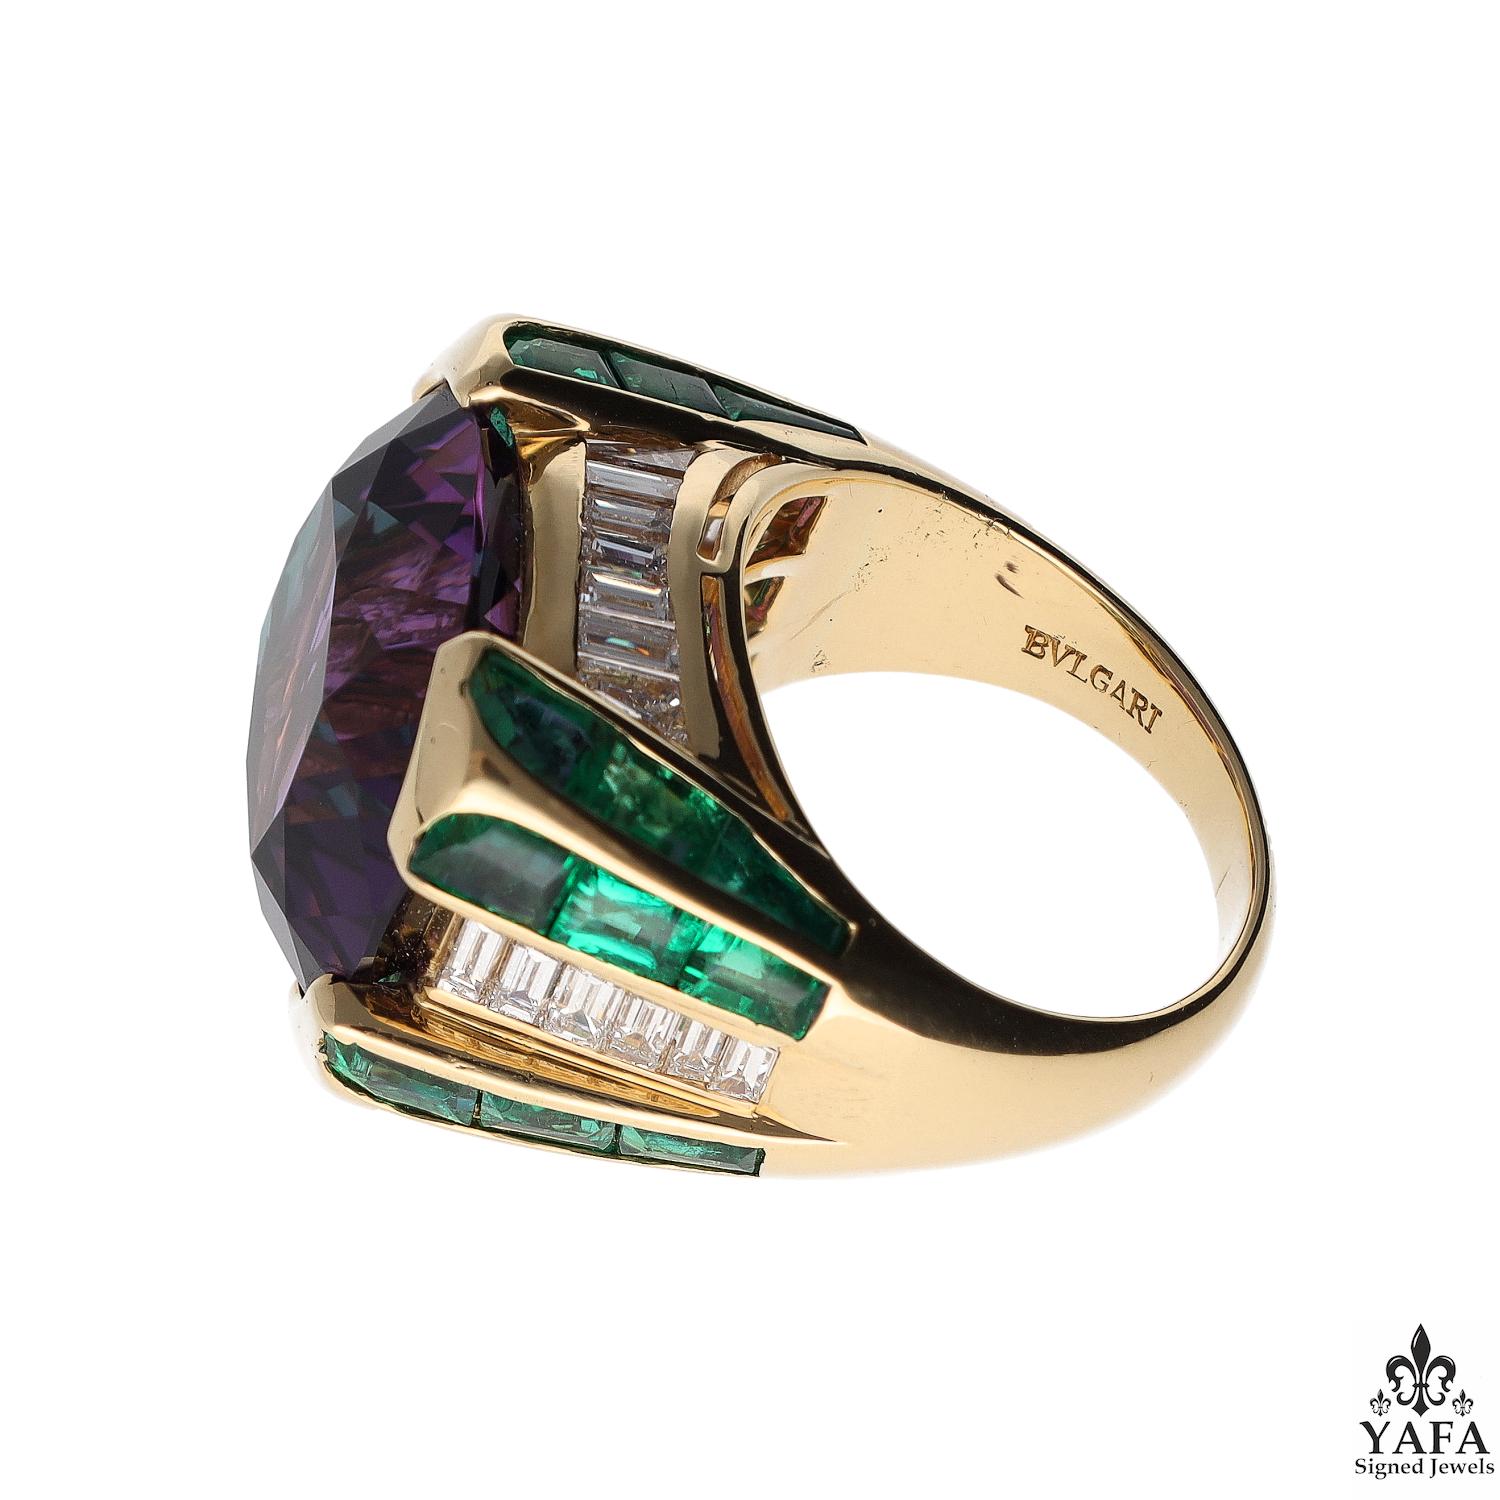 Bulgari Rome Vintage 'Carré' Amethyst Diamond Emerald 18KT Signet Ring

From the Bulgari Rome 1990s  'Carré' Collection, a statement signet 18kt yellow gold large gem amethyst set with cabochon baguette emeralds and diamond baguettes ring from our